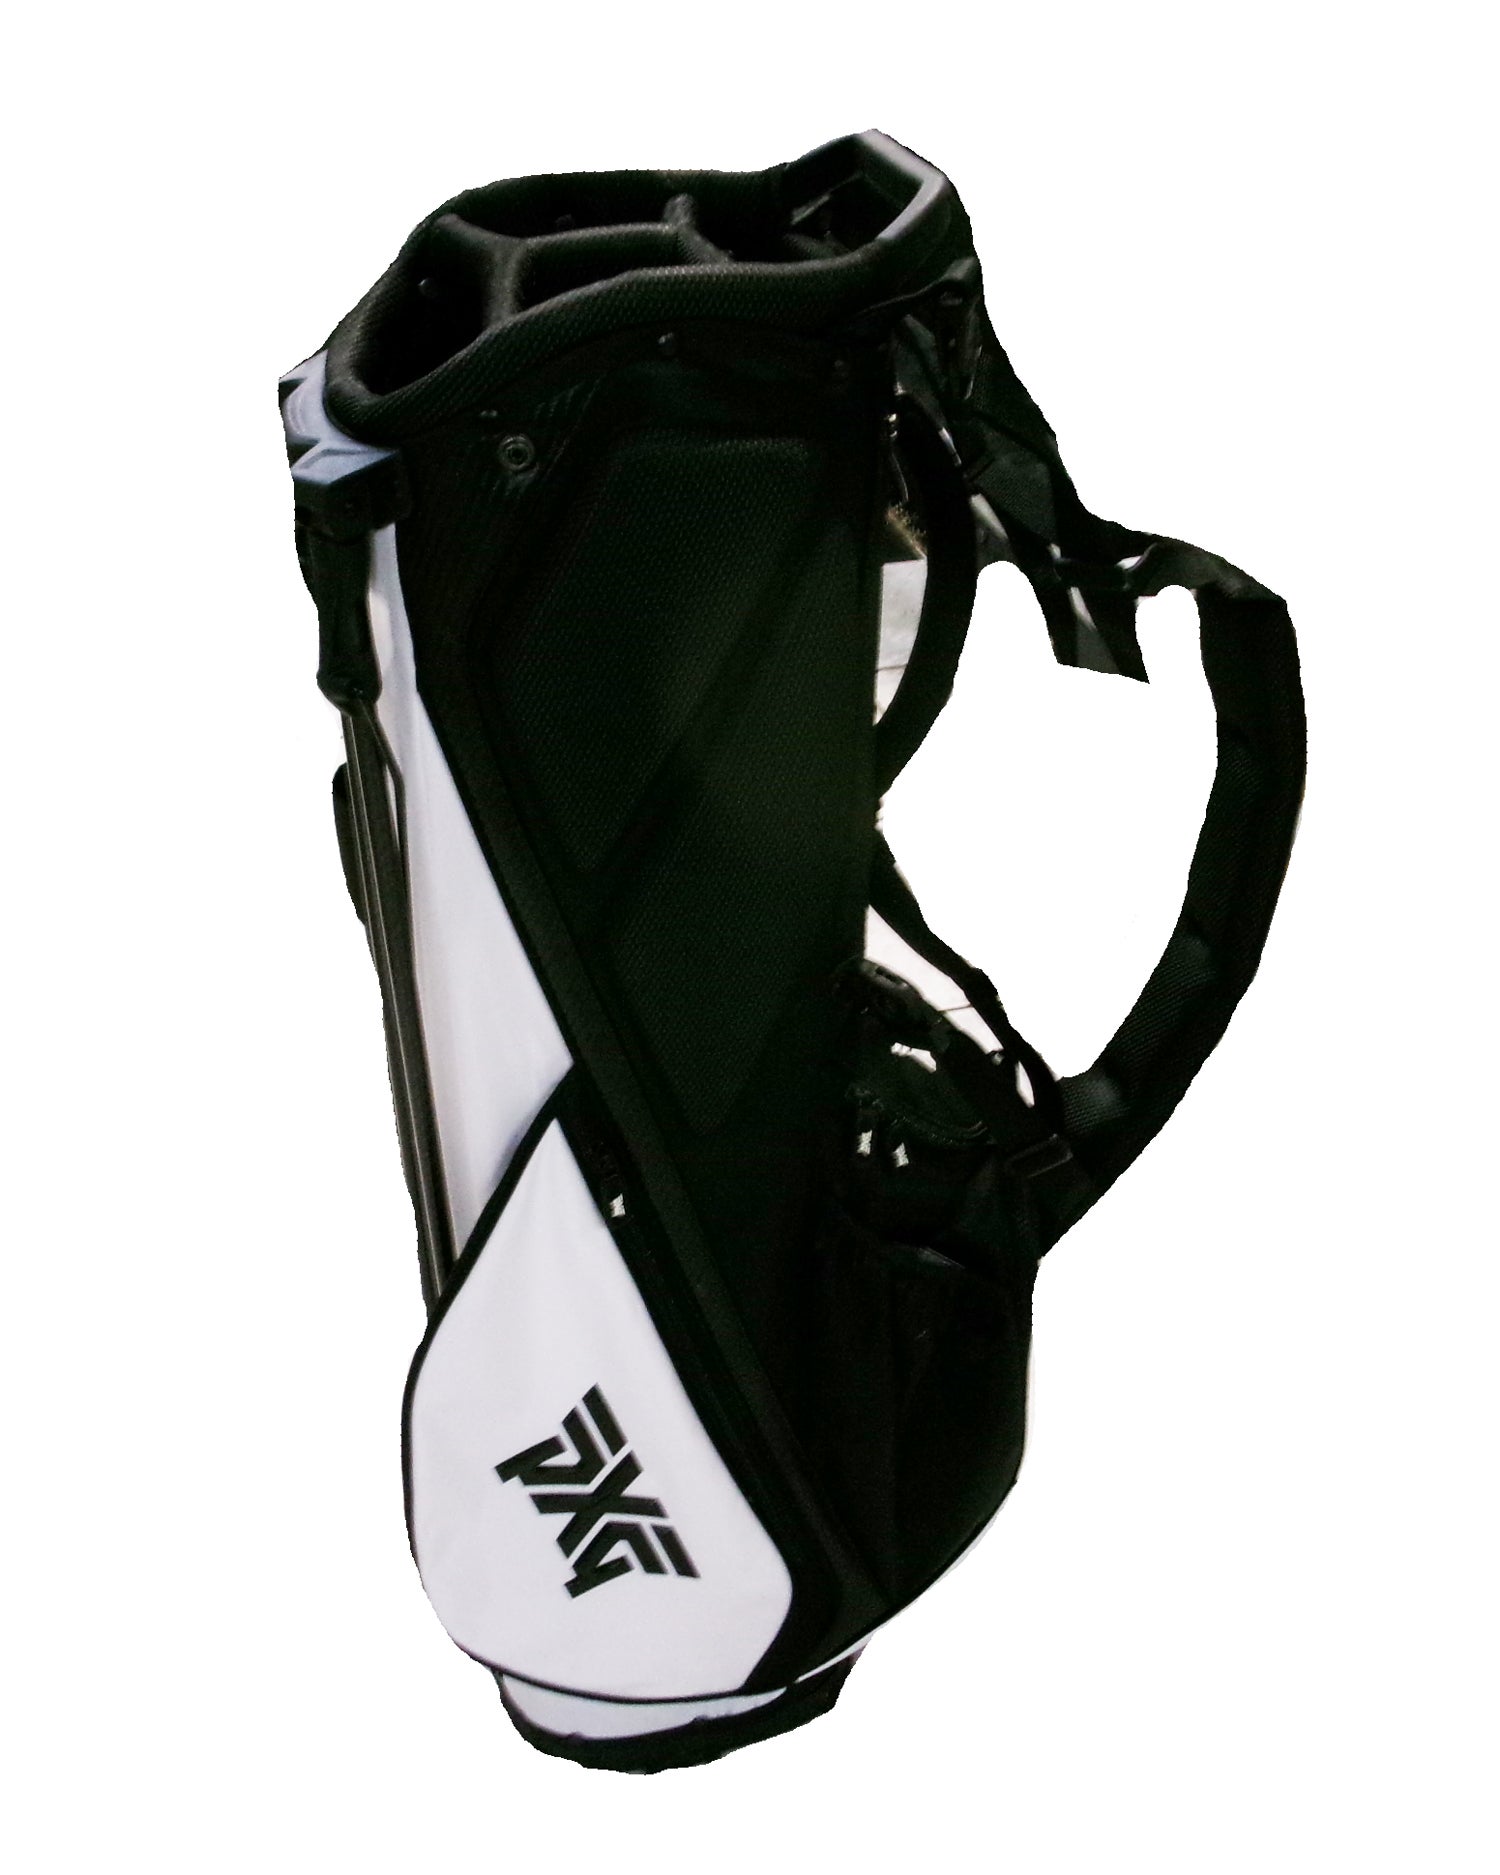 PXG Lightweight Carry Stand Bag in Black & White